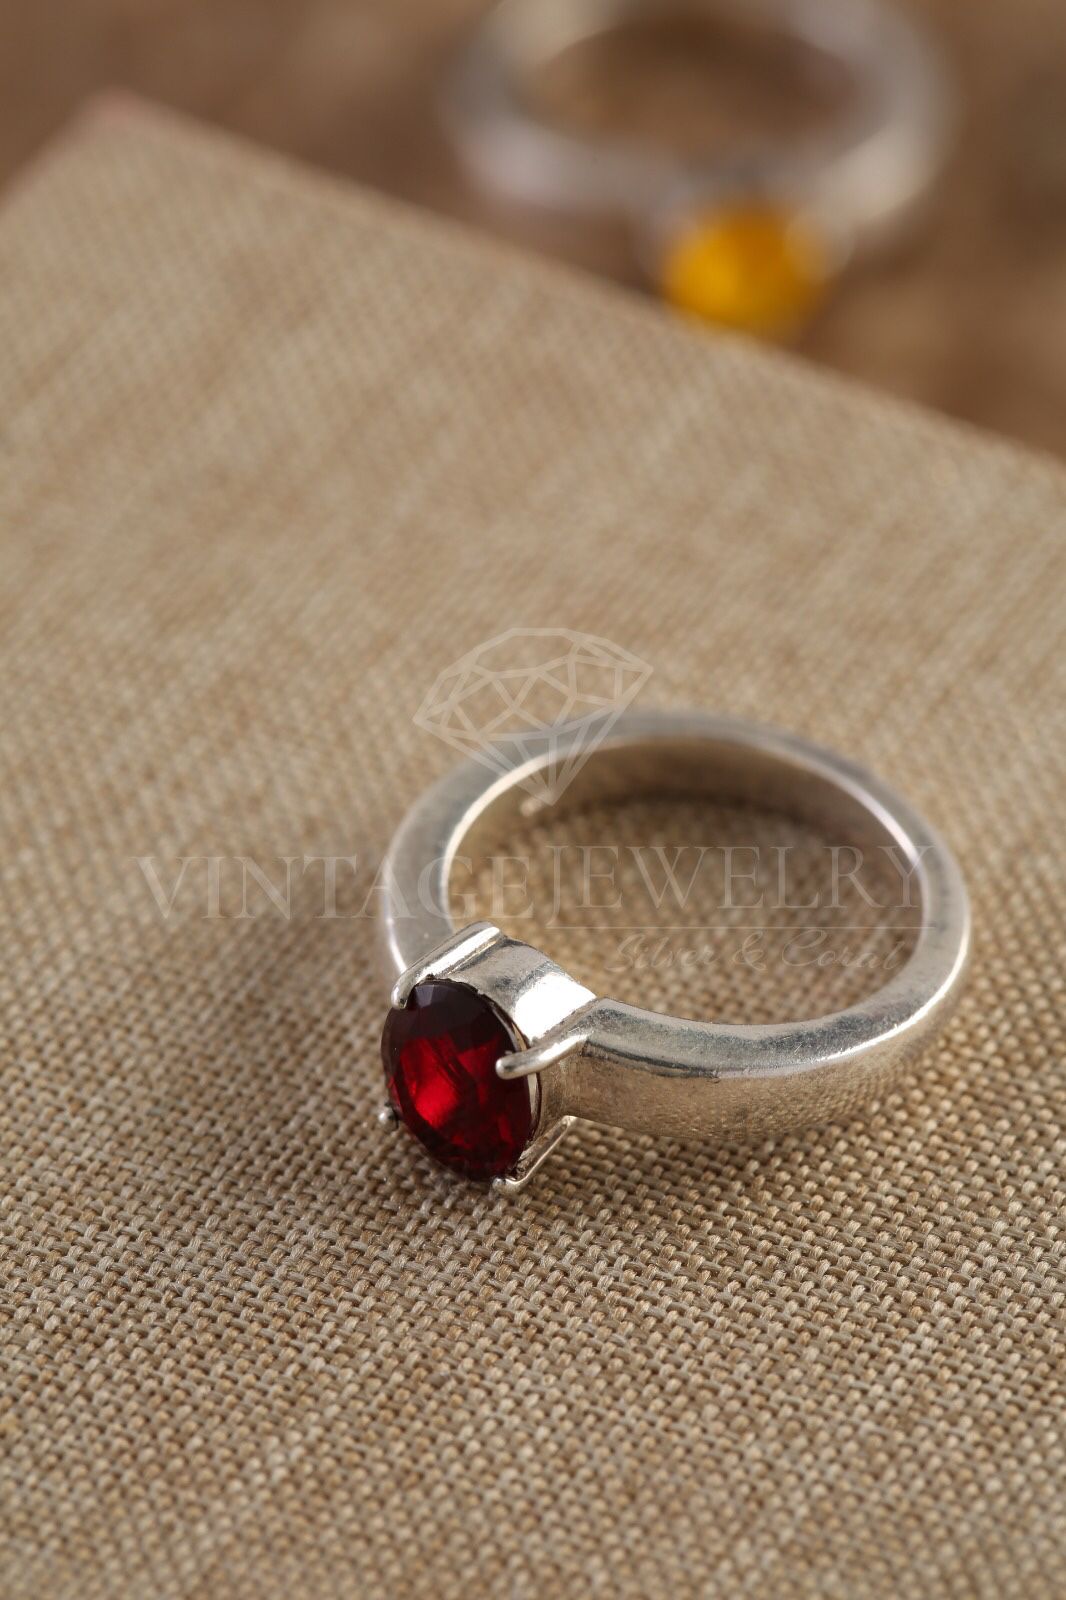 Vintage 925 sterling silver ring with red zircon